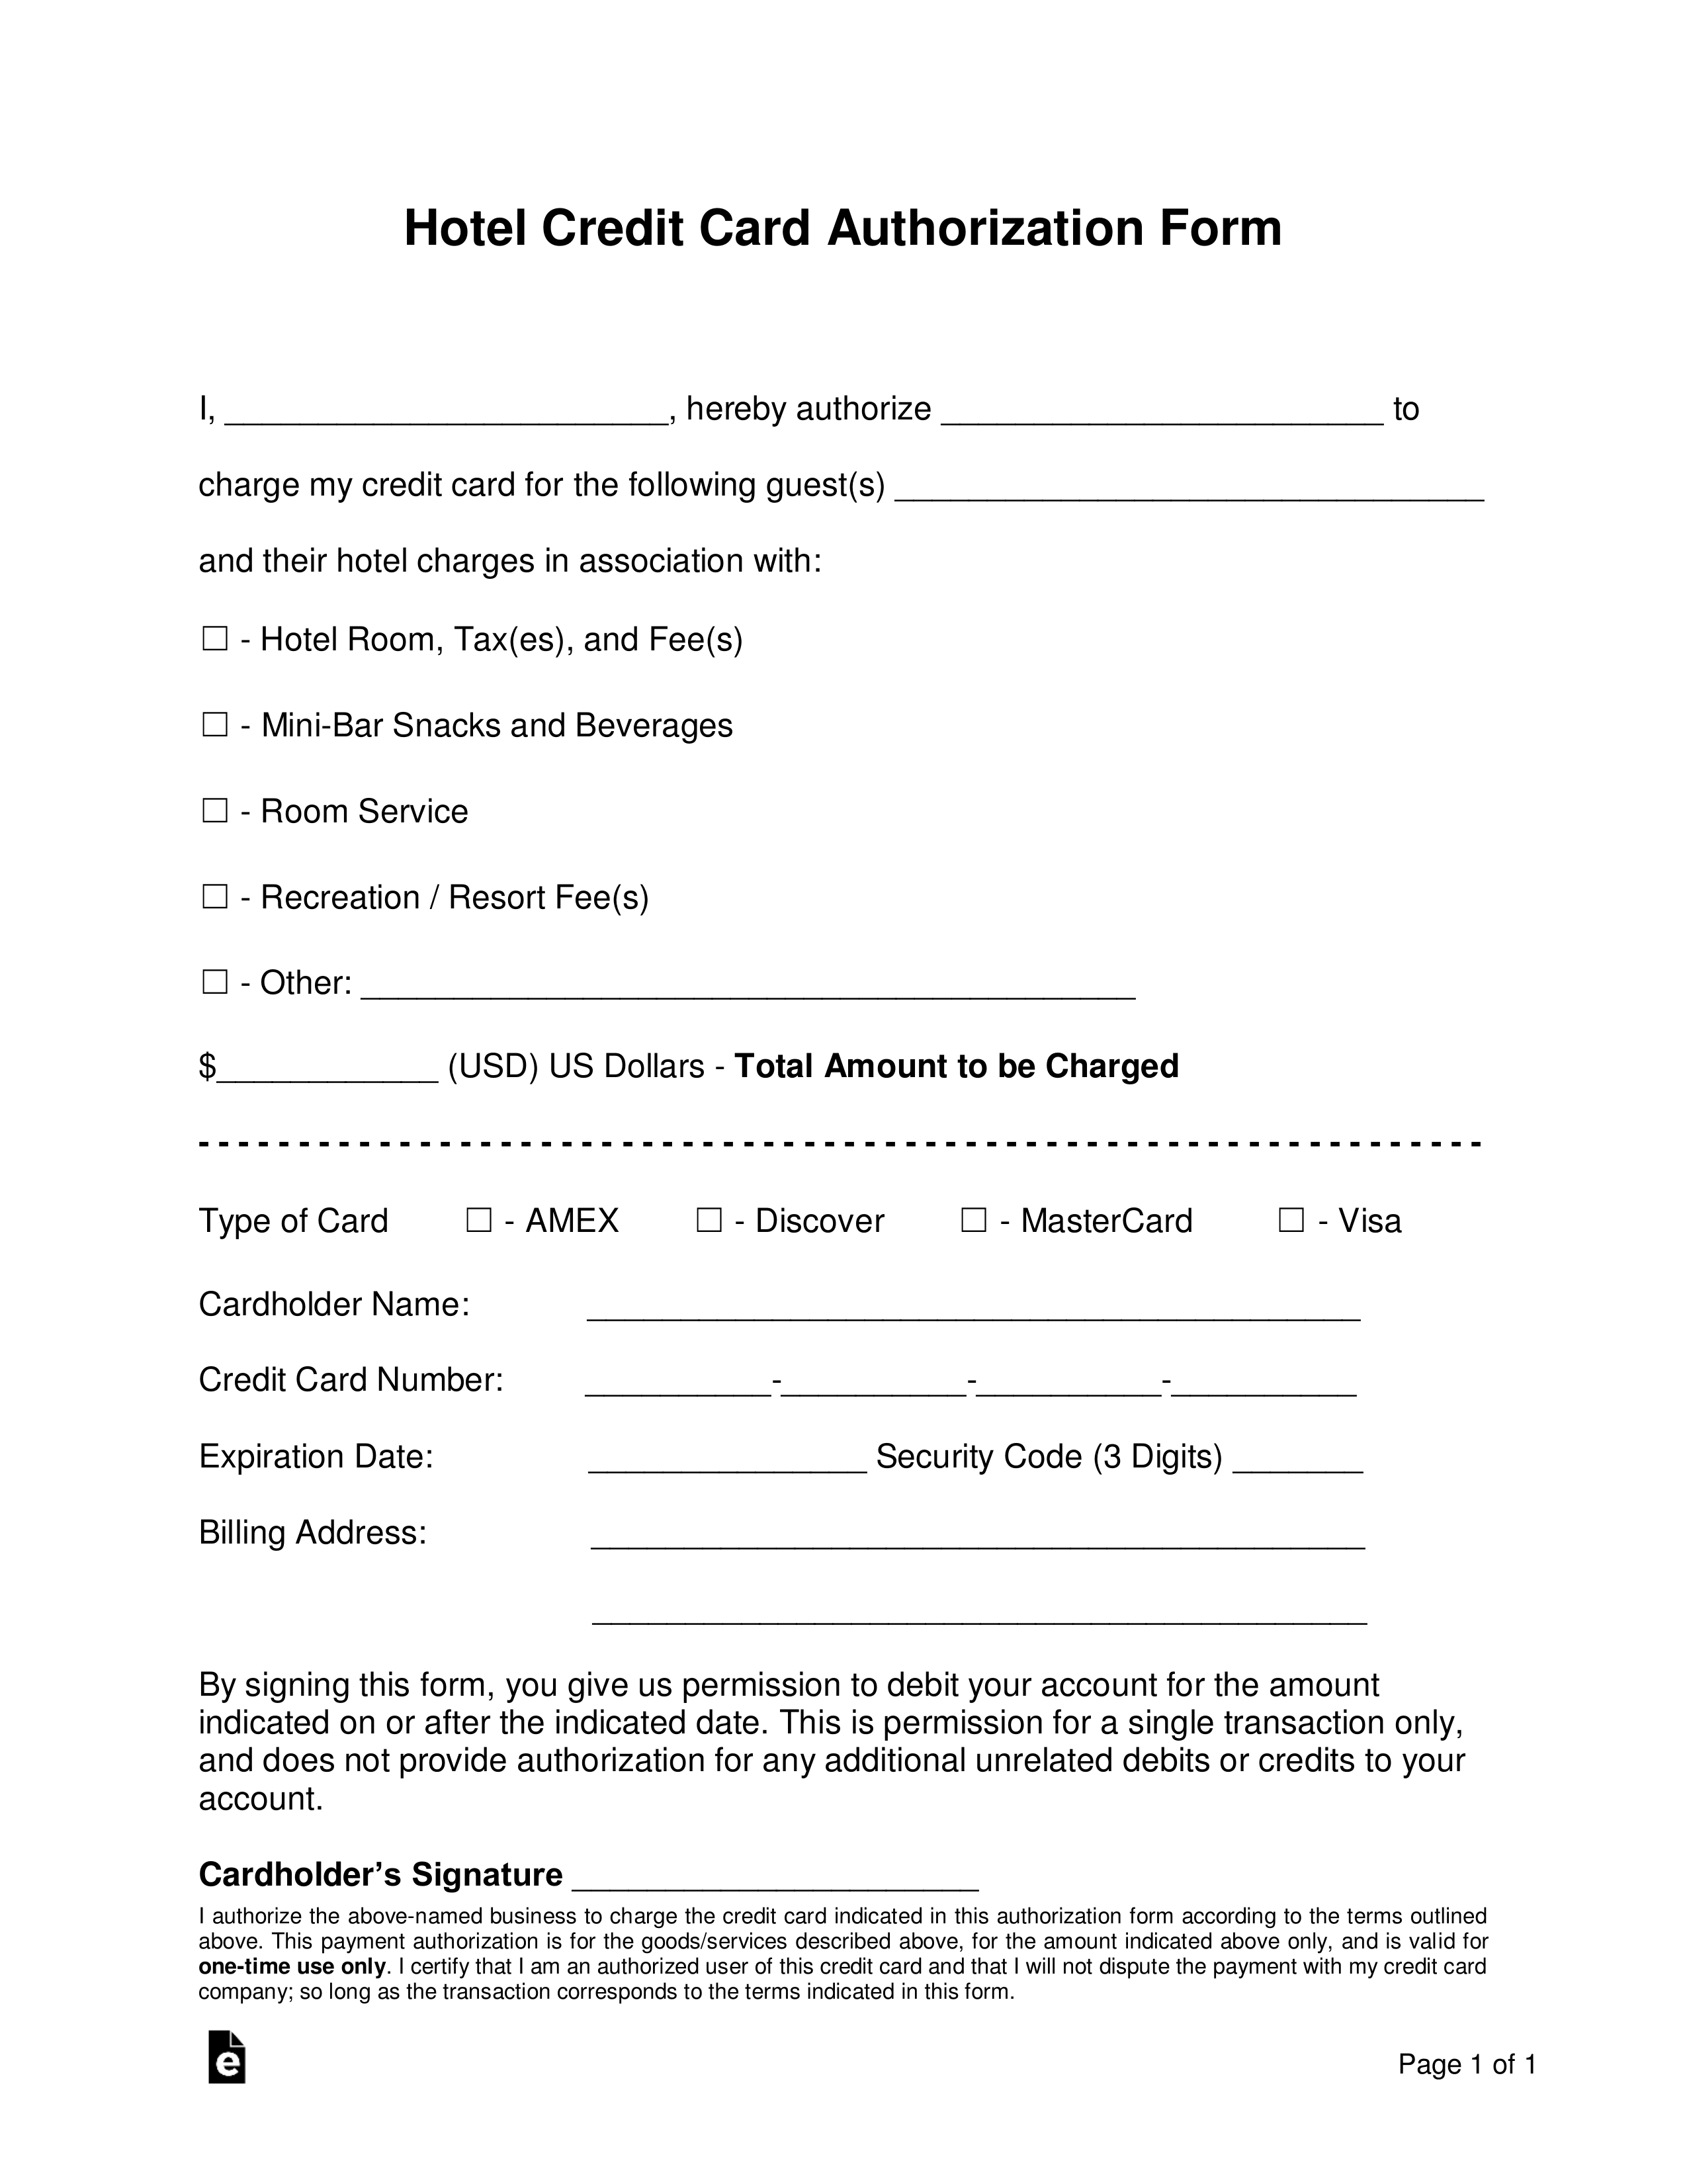 Free Hotel Credit Card Authorization Forms - Word | Pdf Regarding Hotel Credit Card Authorization Form Template